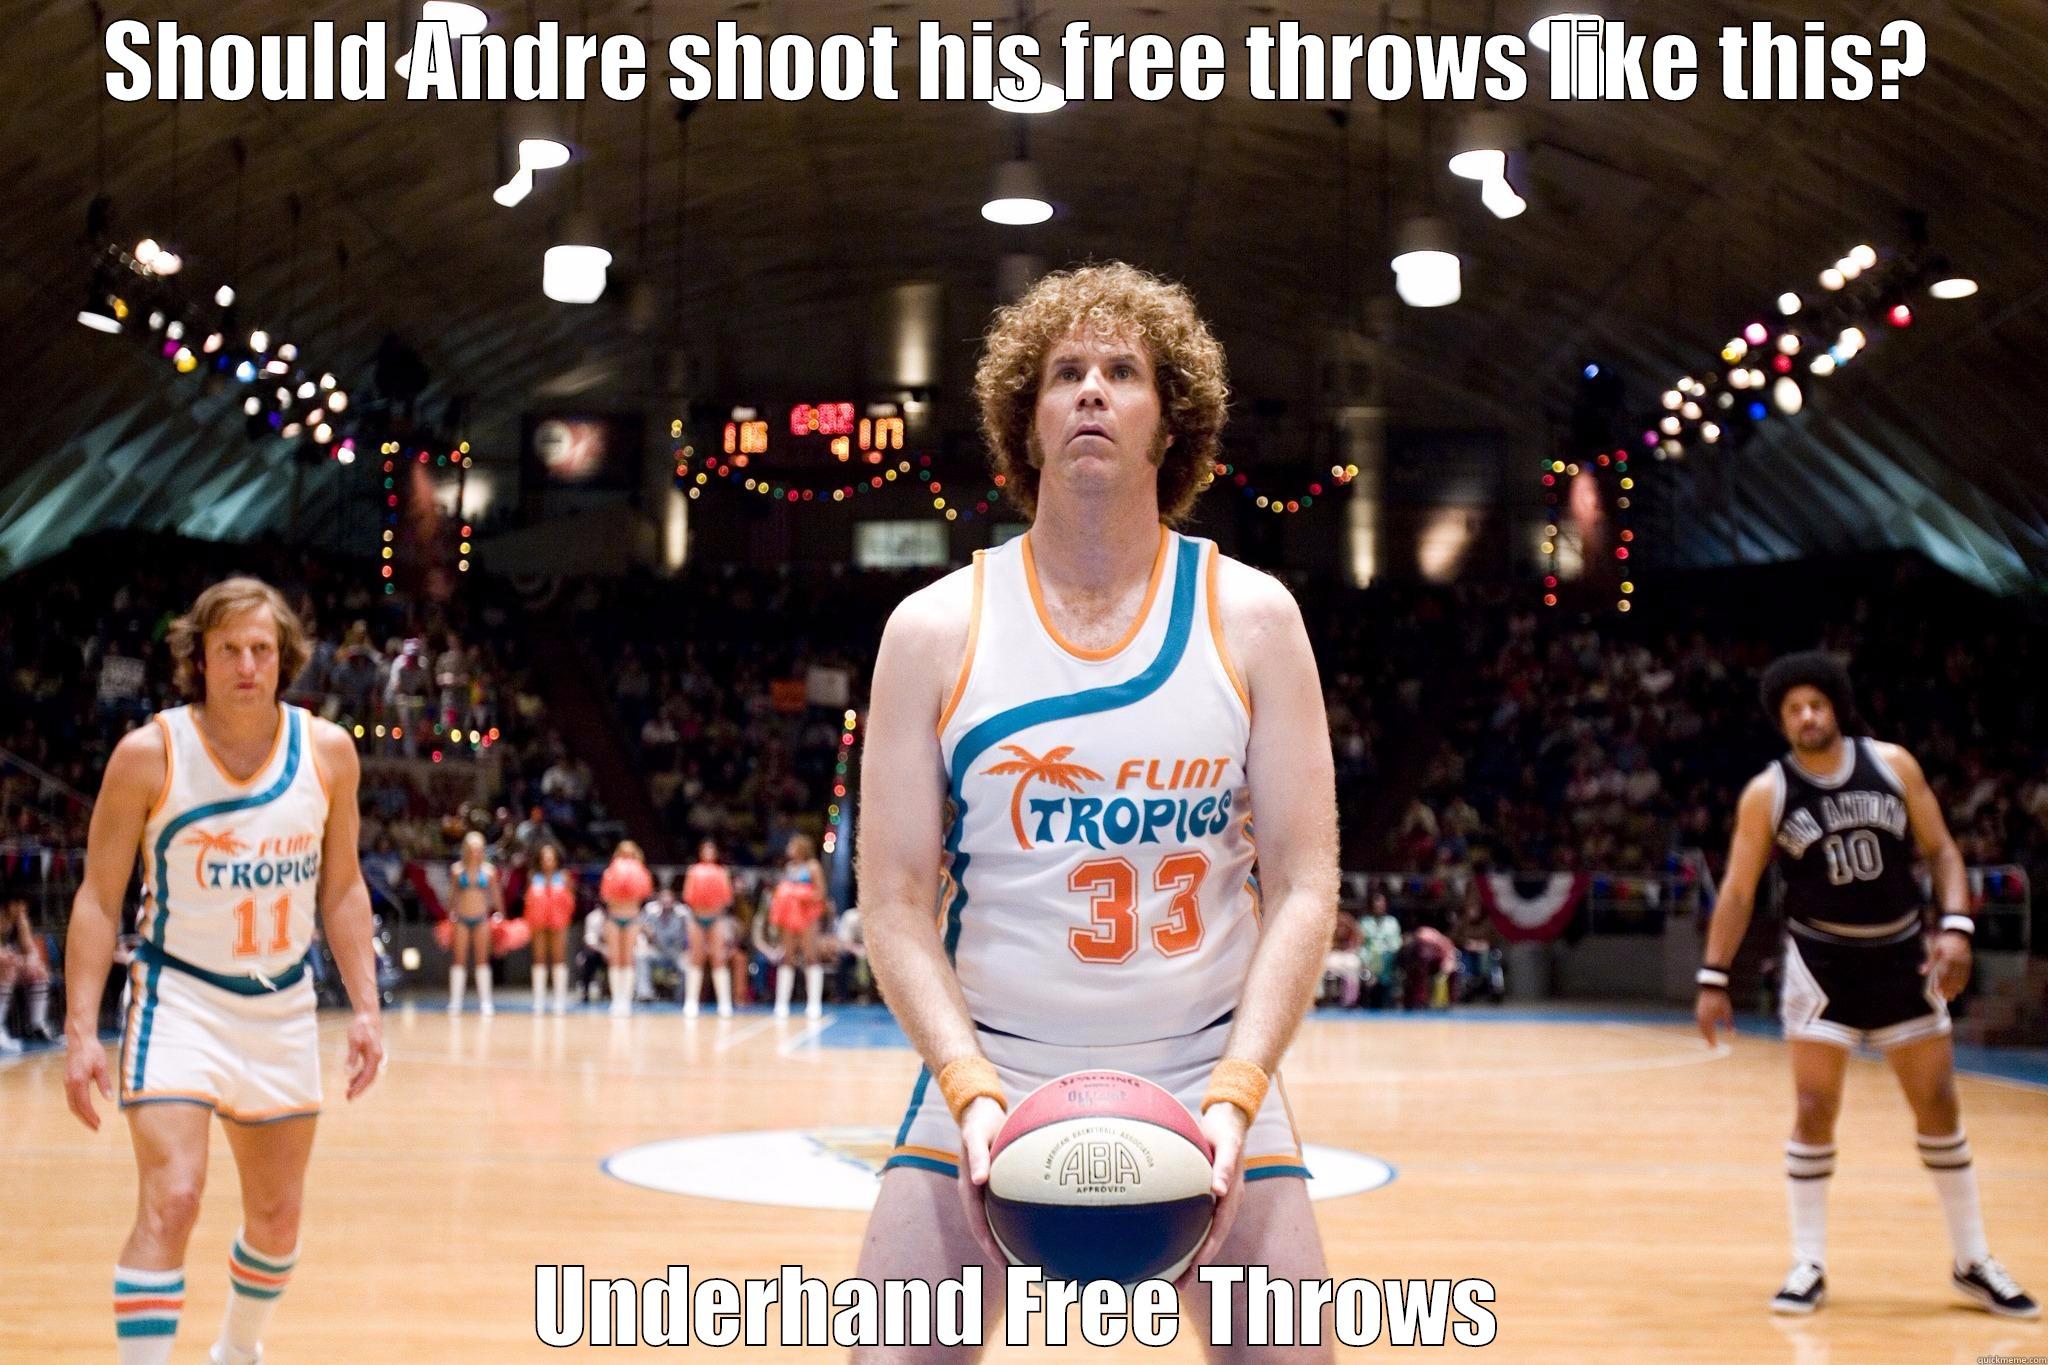 Free throws - SHOULD ANDRE SHOOT HIS FREE THROWS LIKE THIS? UNDERHAND FREE THROWS Misc